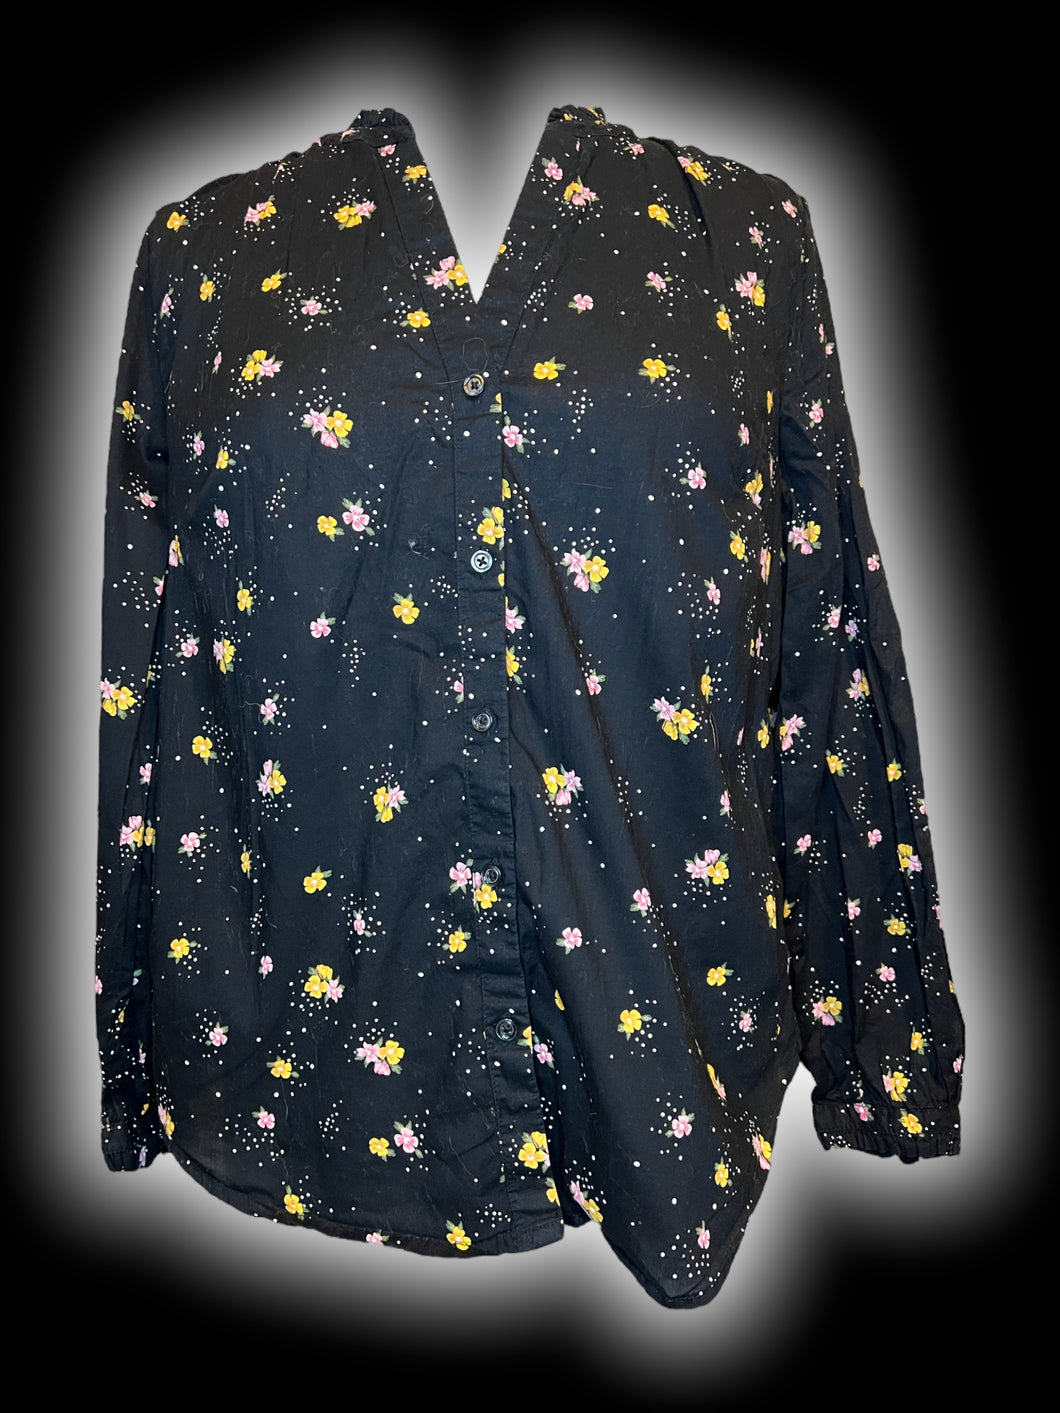 L Black, pink, & yellow floral long sleeve button-up v-neck top w/ ruffle detail neckline